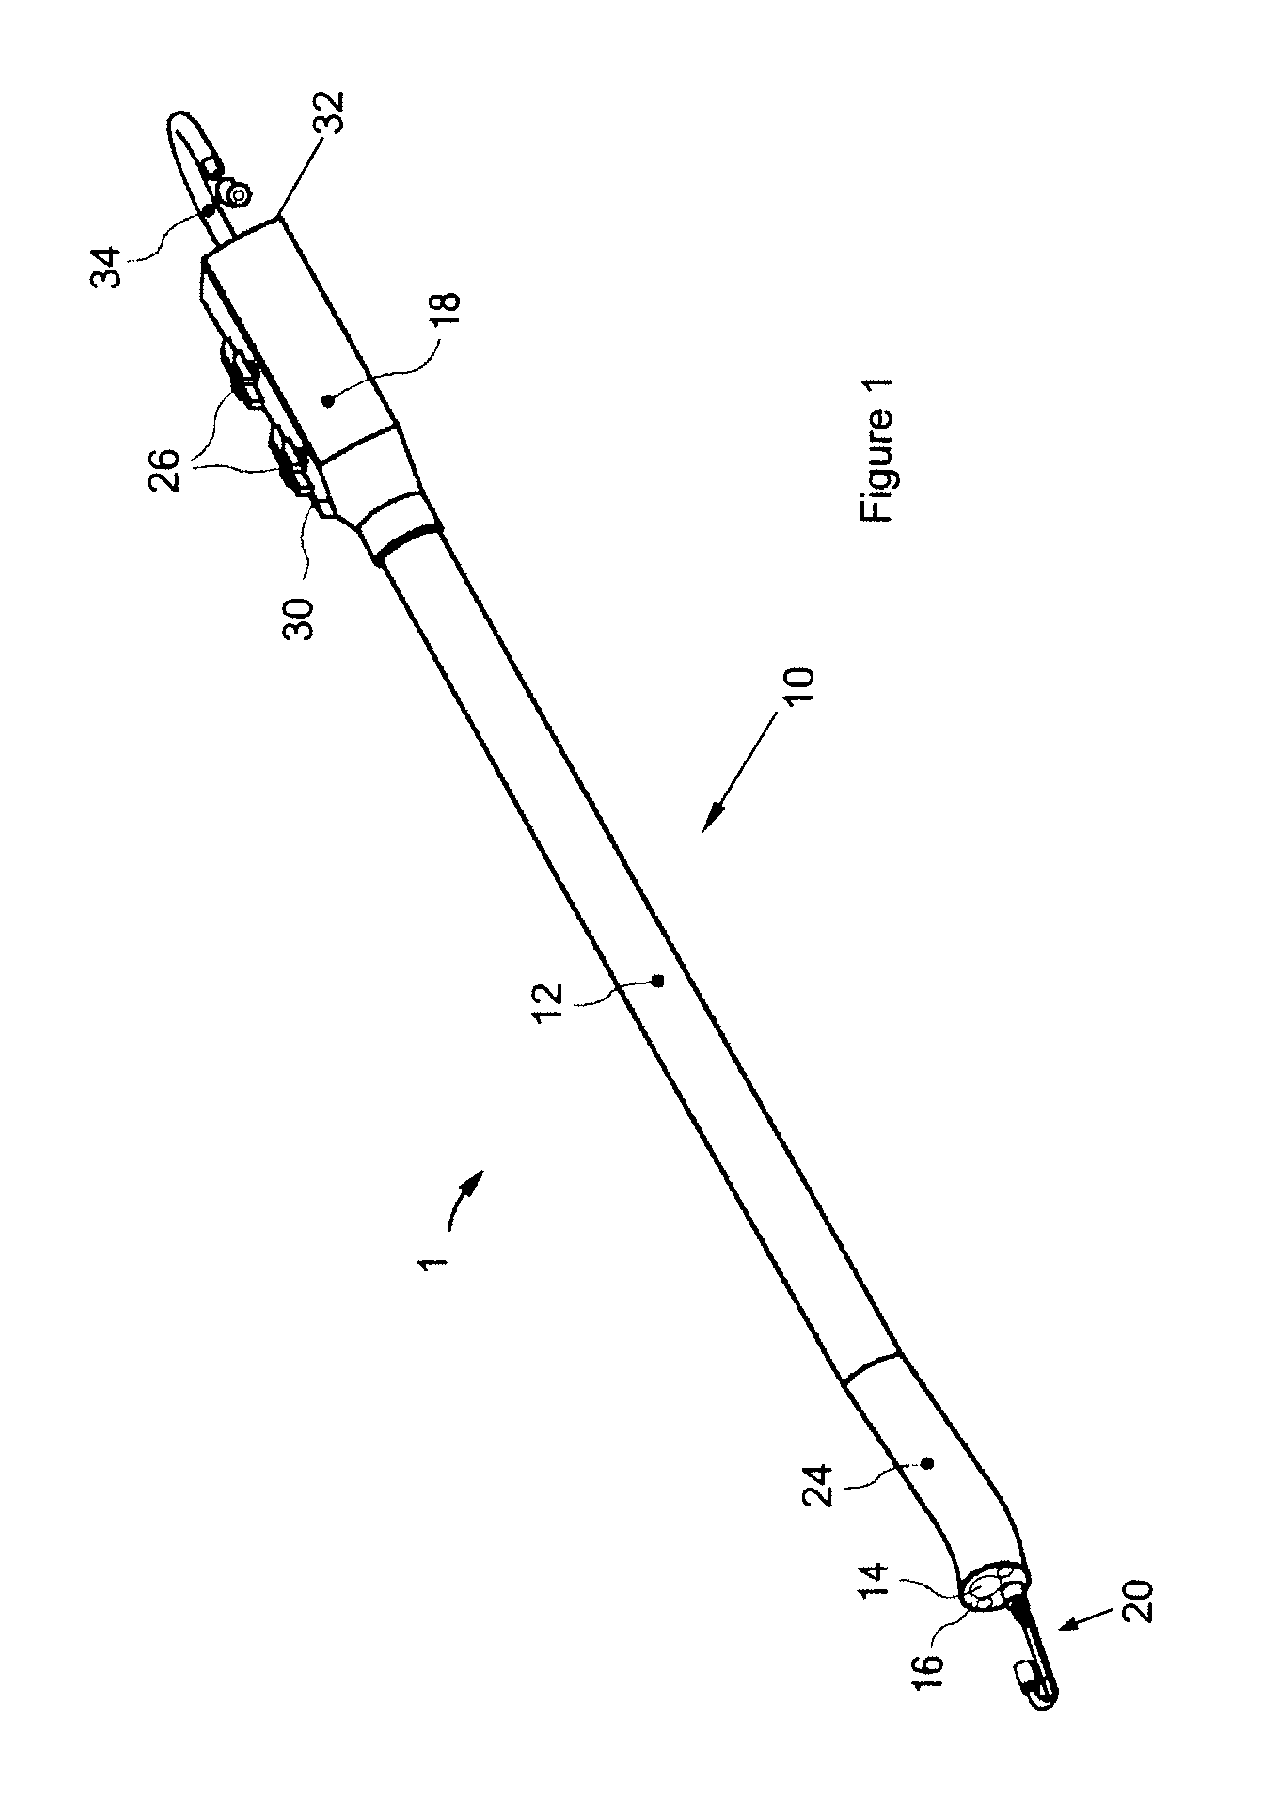 Endoscope Assembly and Method of Performing a Medical Procedure